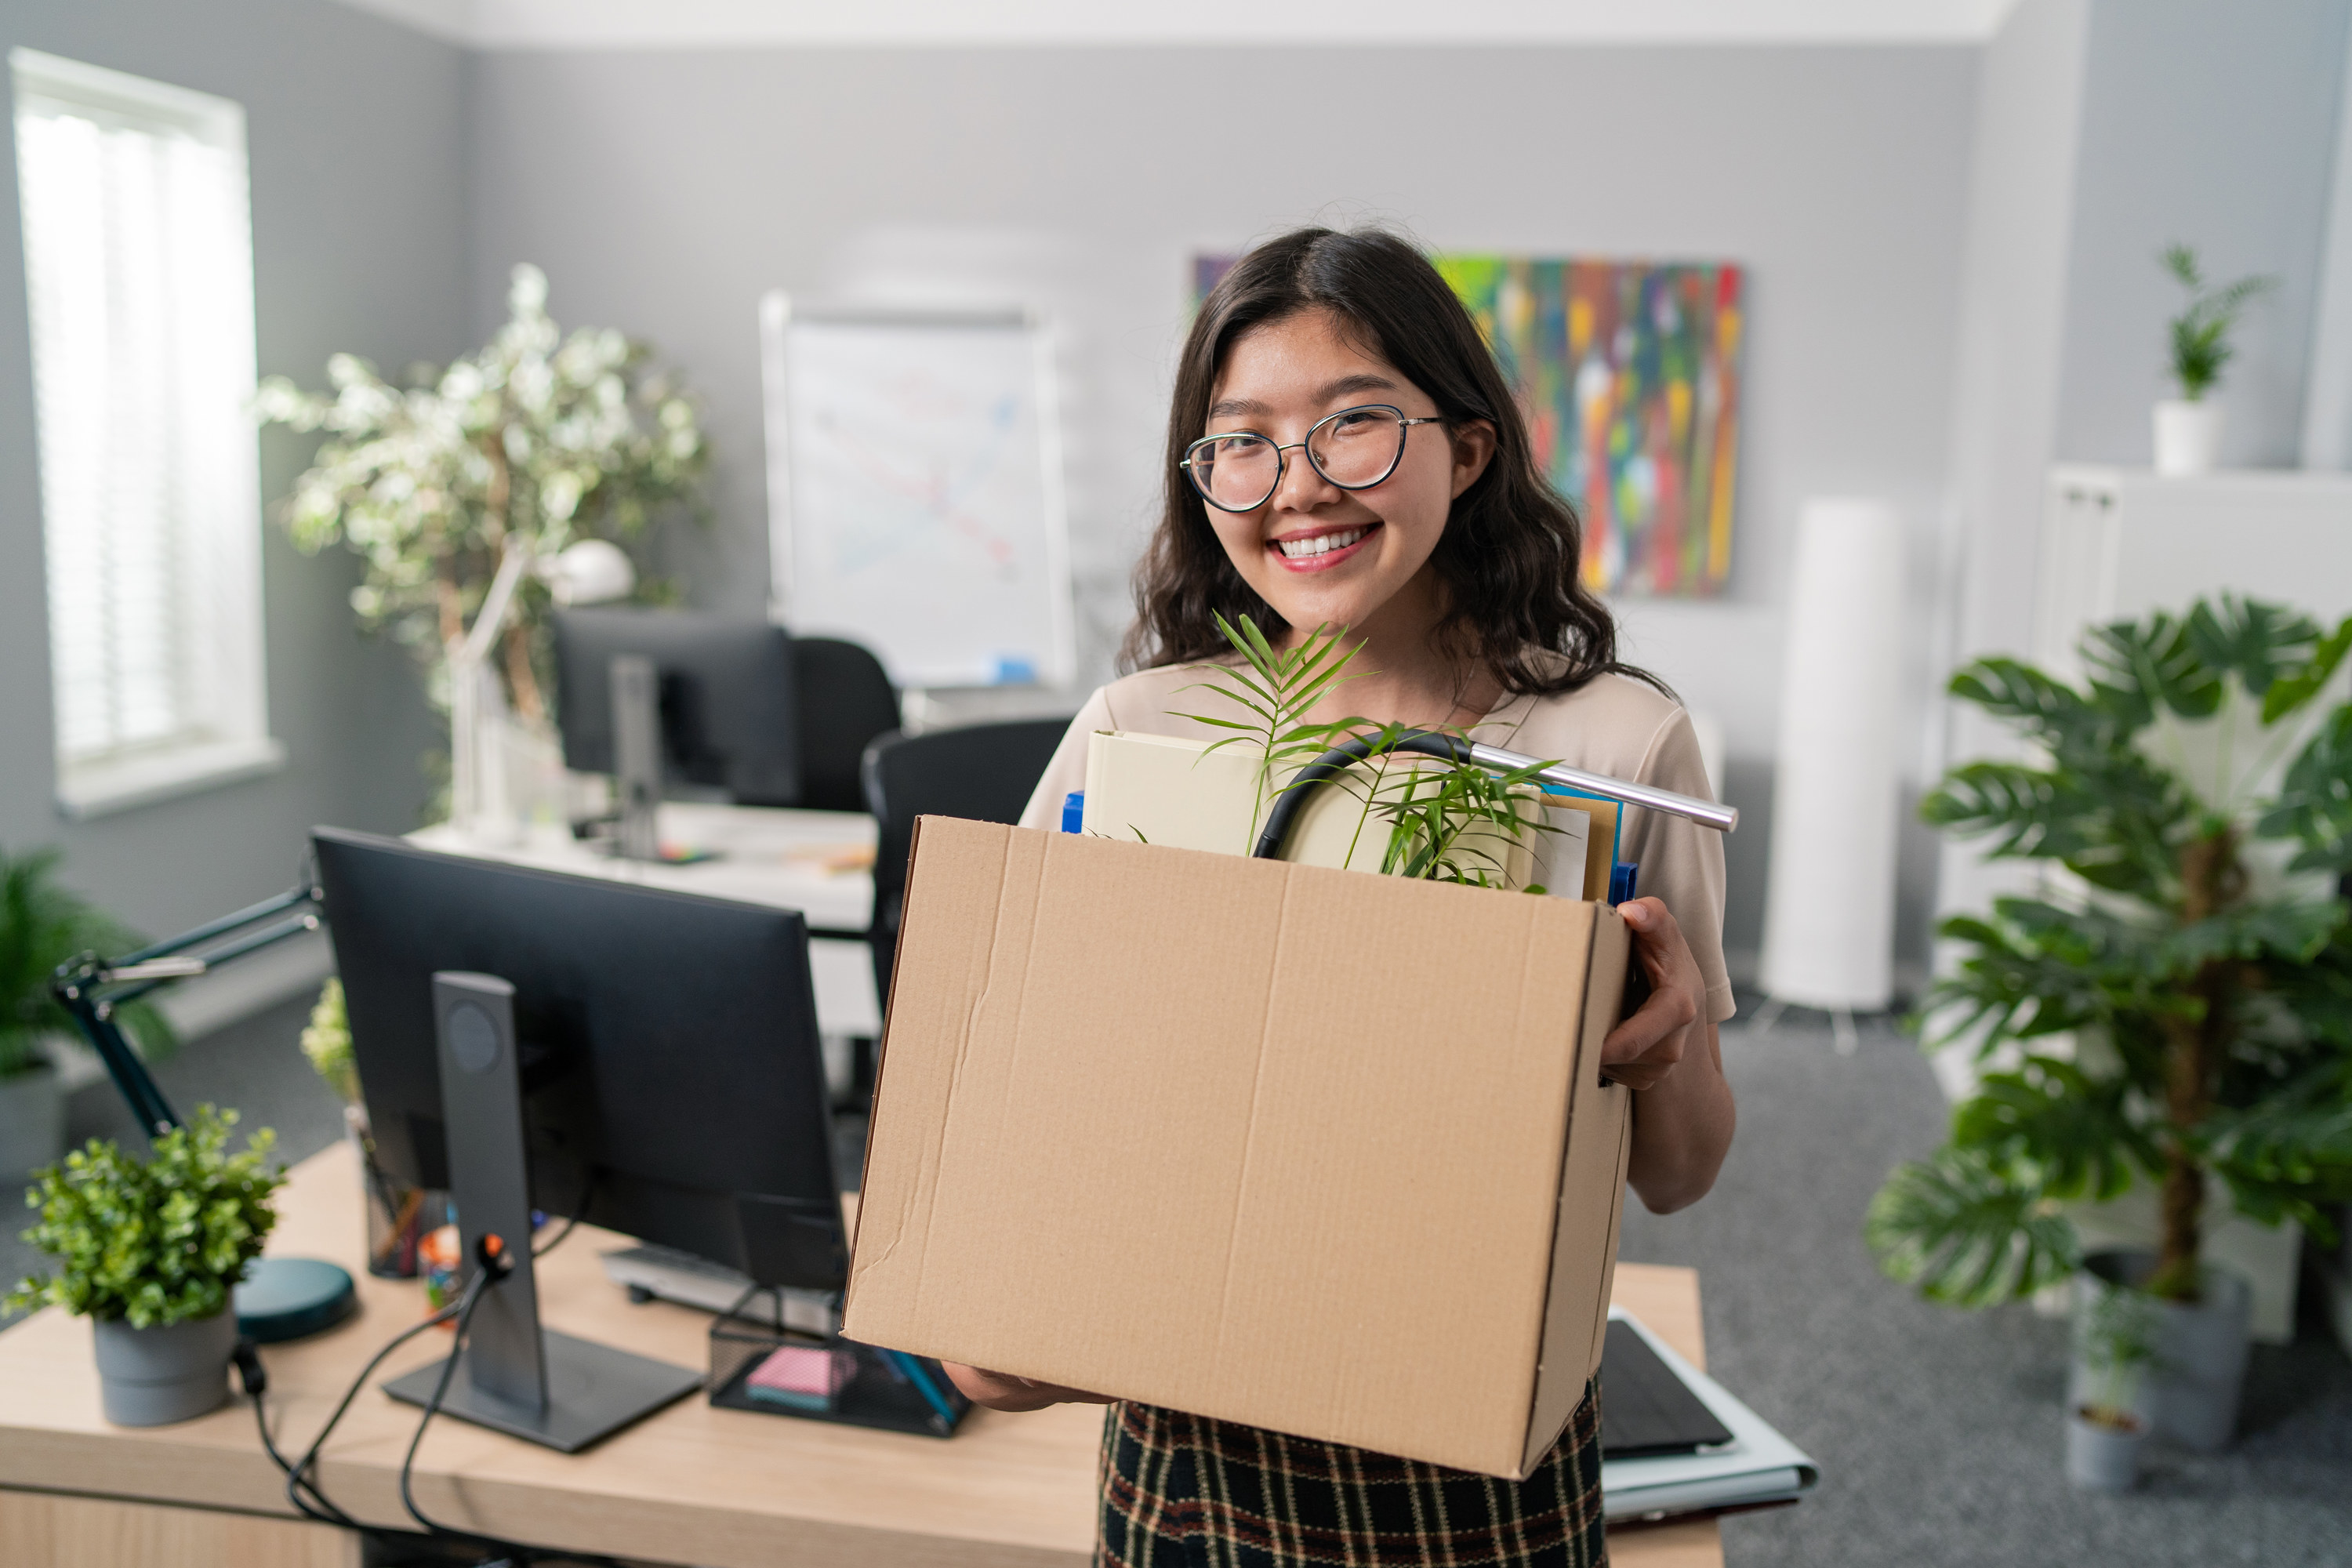 Smiling woman carrying a box out of her office after quitting